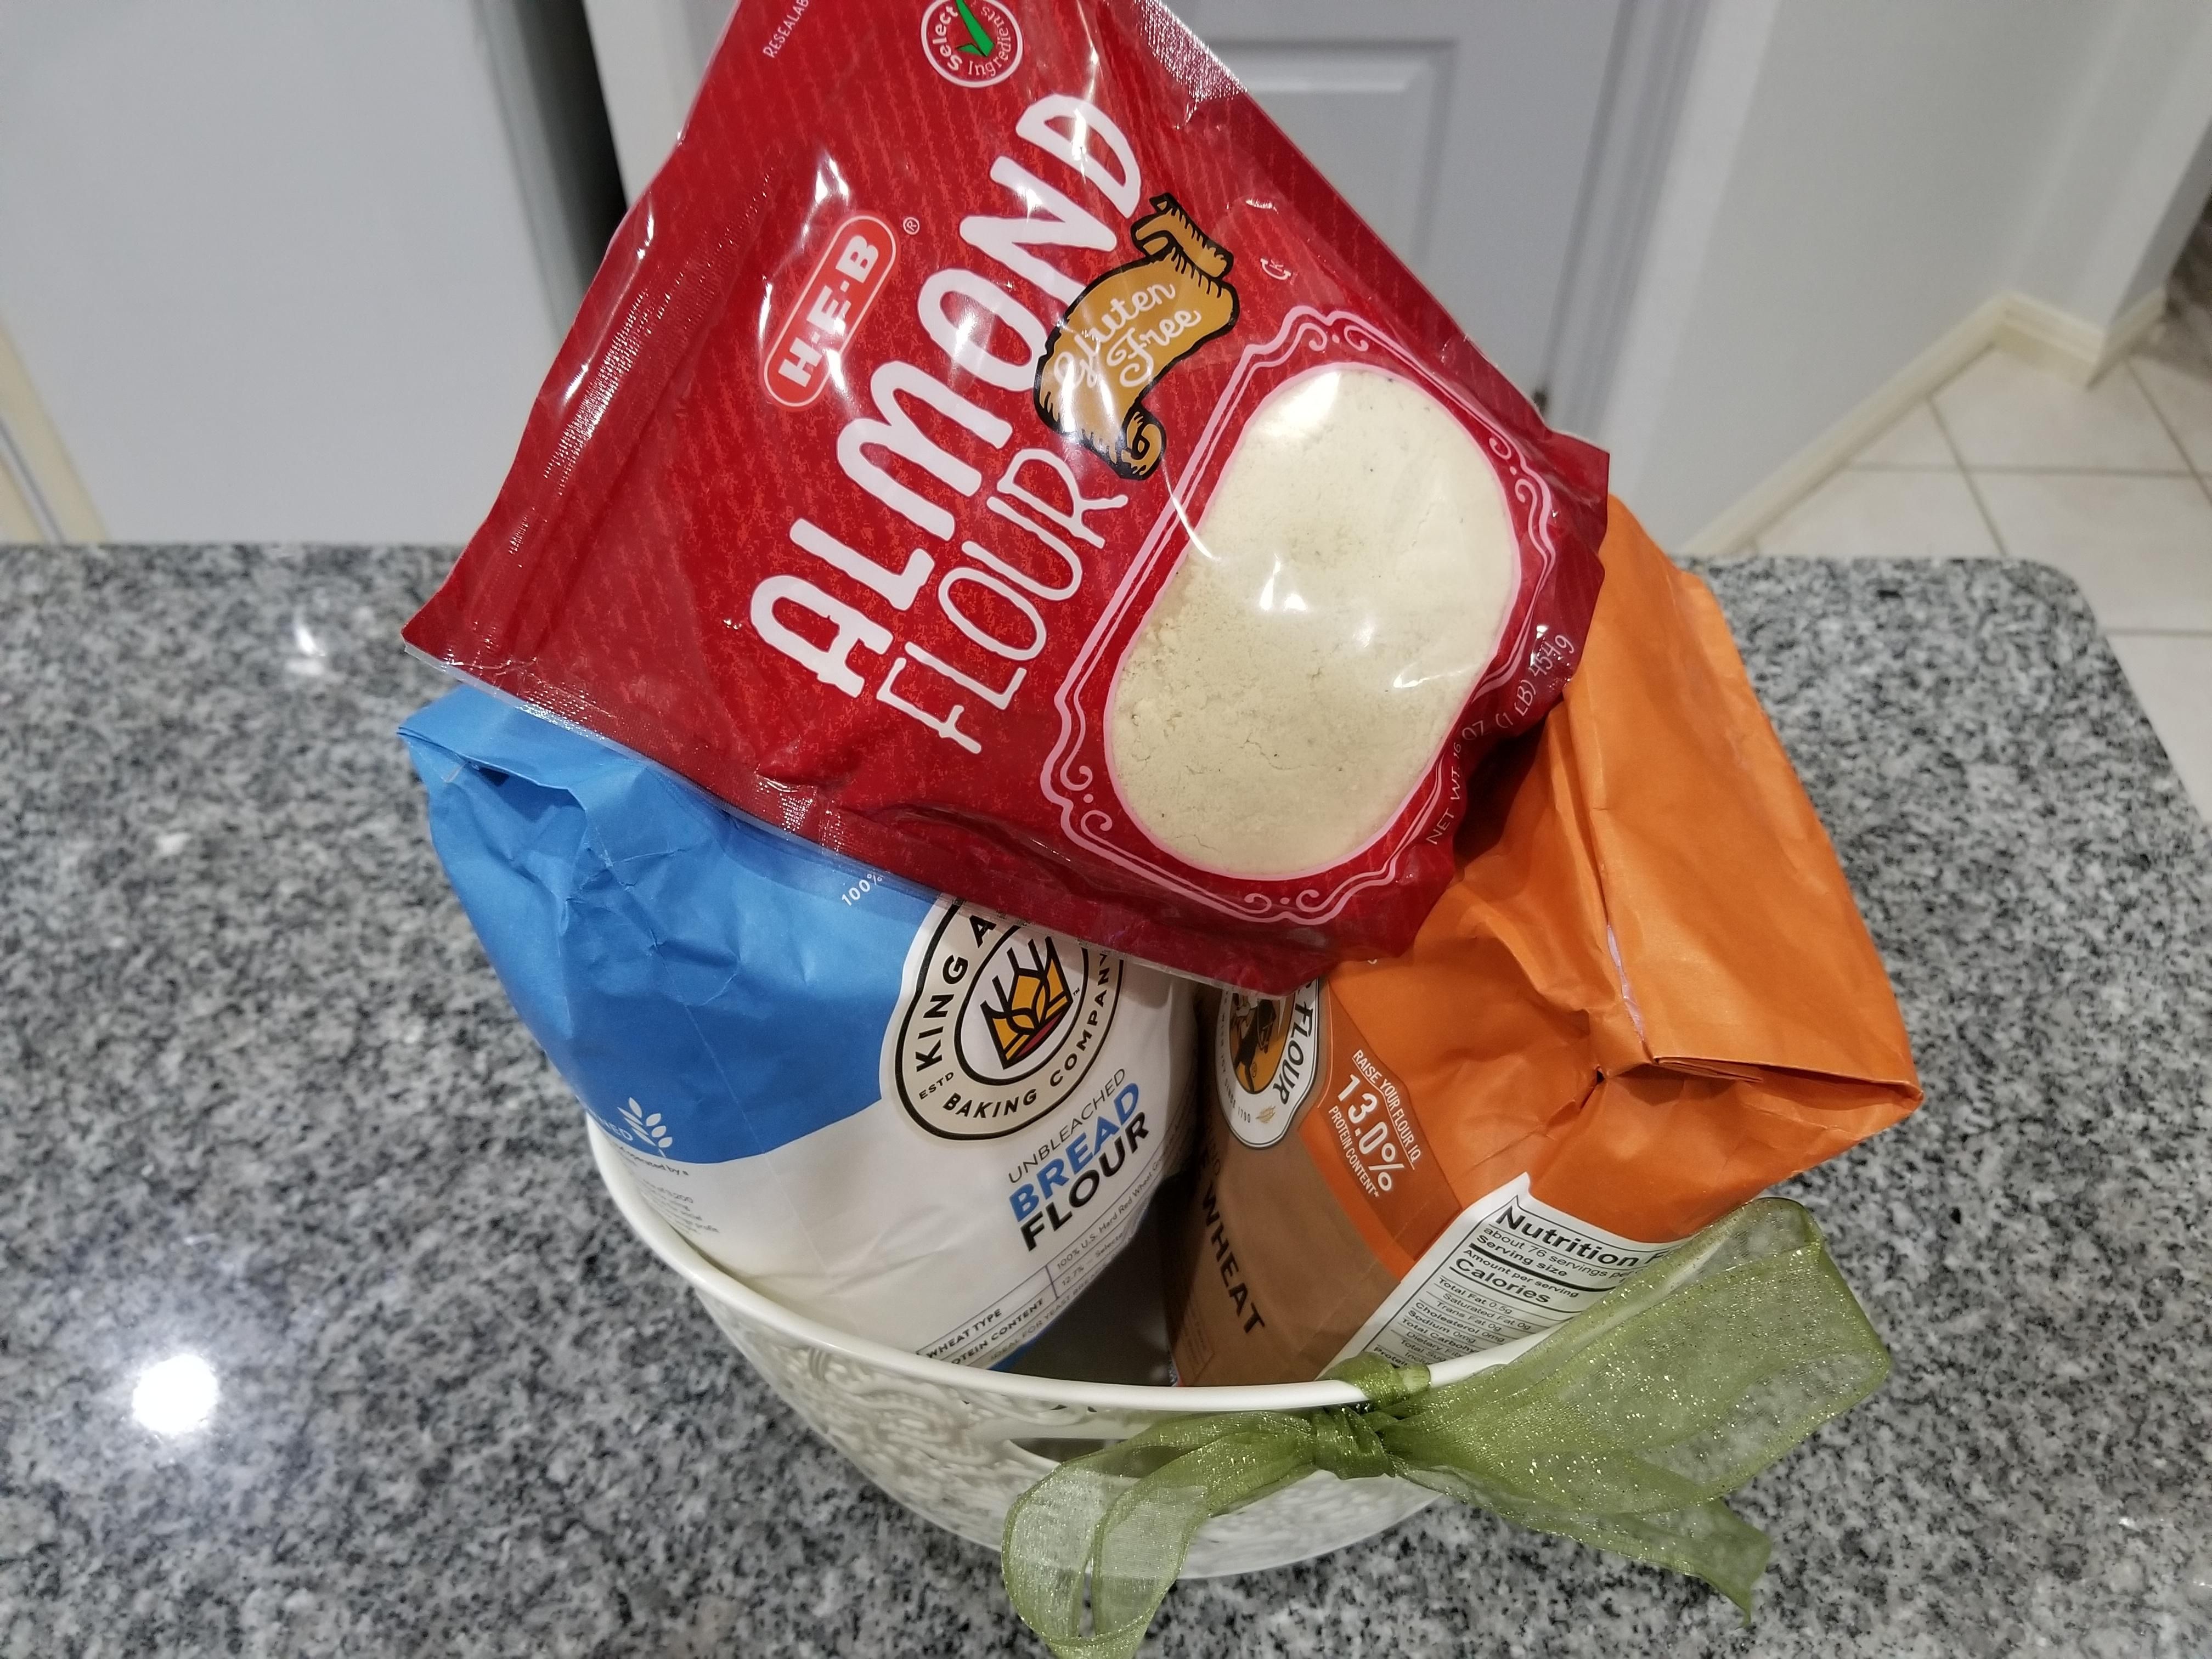 I am picking my wife up at the airport after a long trip, and a good friend said to bring her some nice flours as a surprise. I am bringing her a basket FULL of her favorite flours.